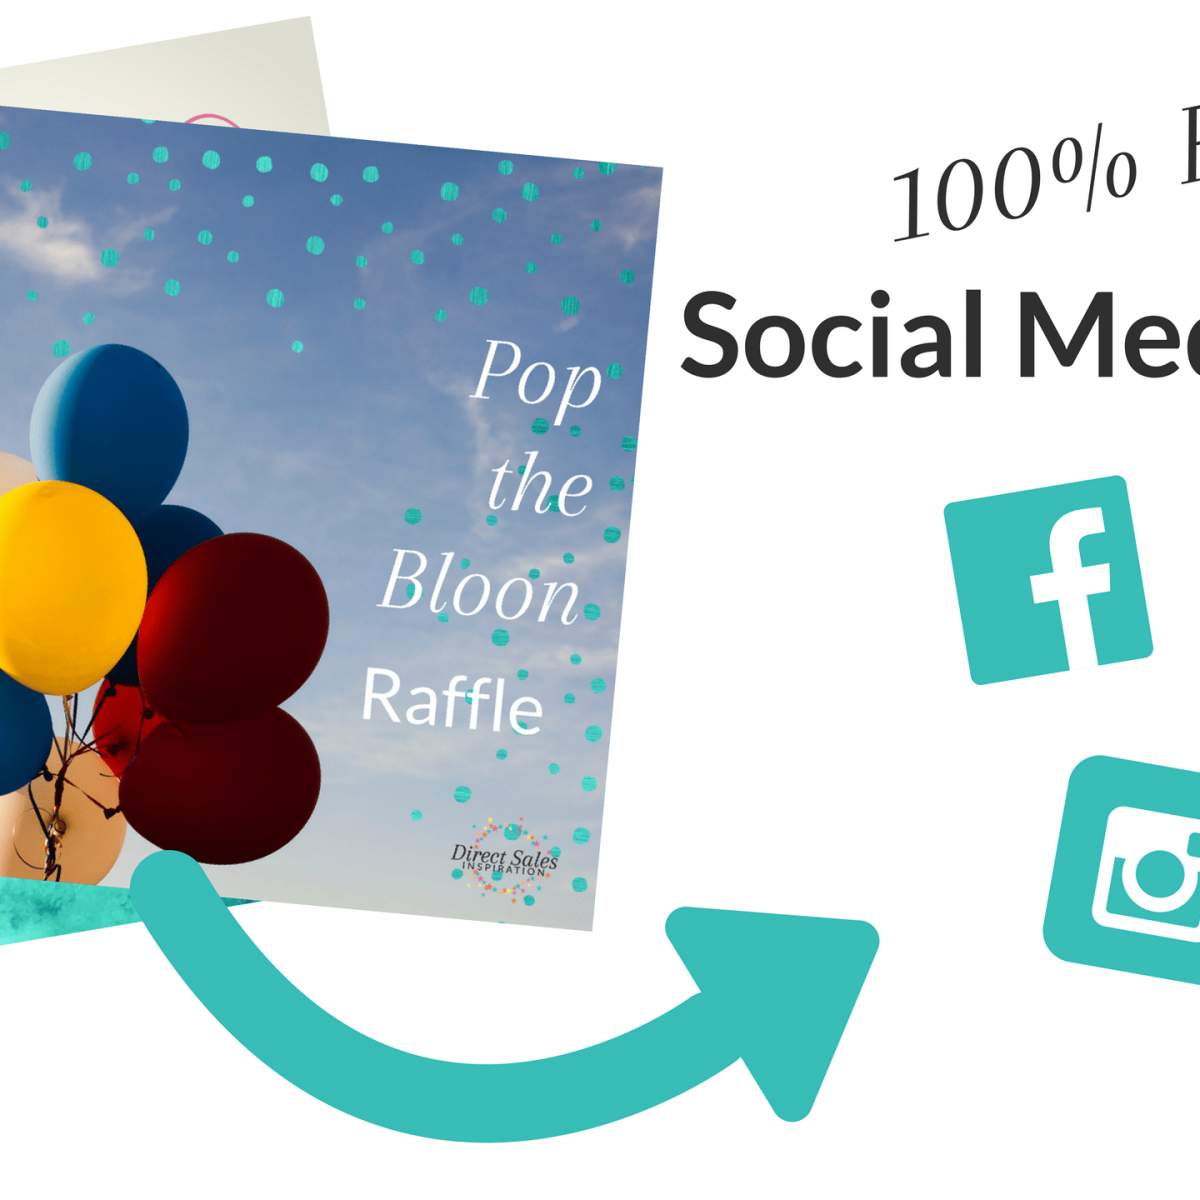 Social Media Tiles for use with the Pop the Bloon game for your party plan business.